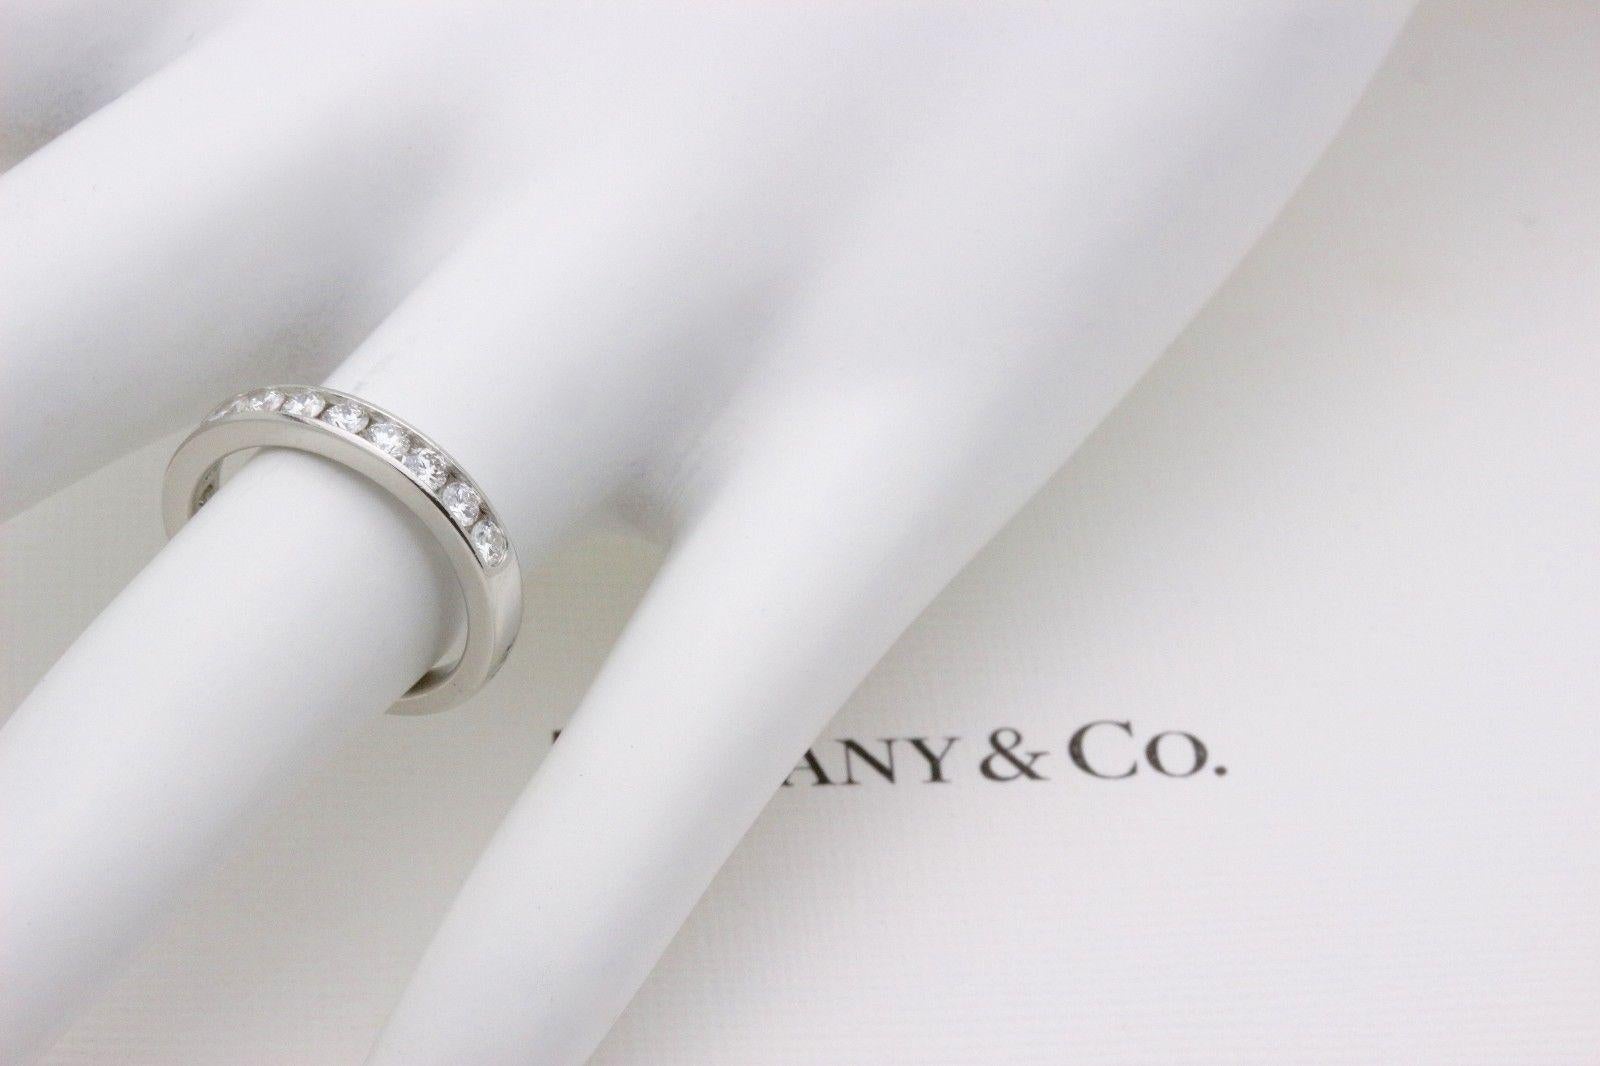 Tiffany & Co. Platinum and Diamond Wedding Band Ring 2.5 MM In Excellent Condition For Sale In San Diego, CA